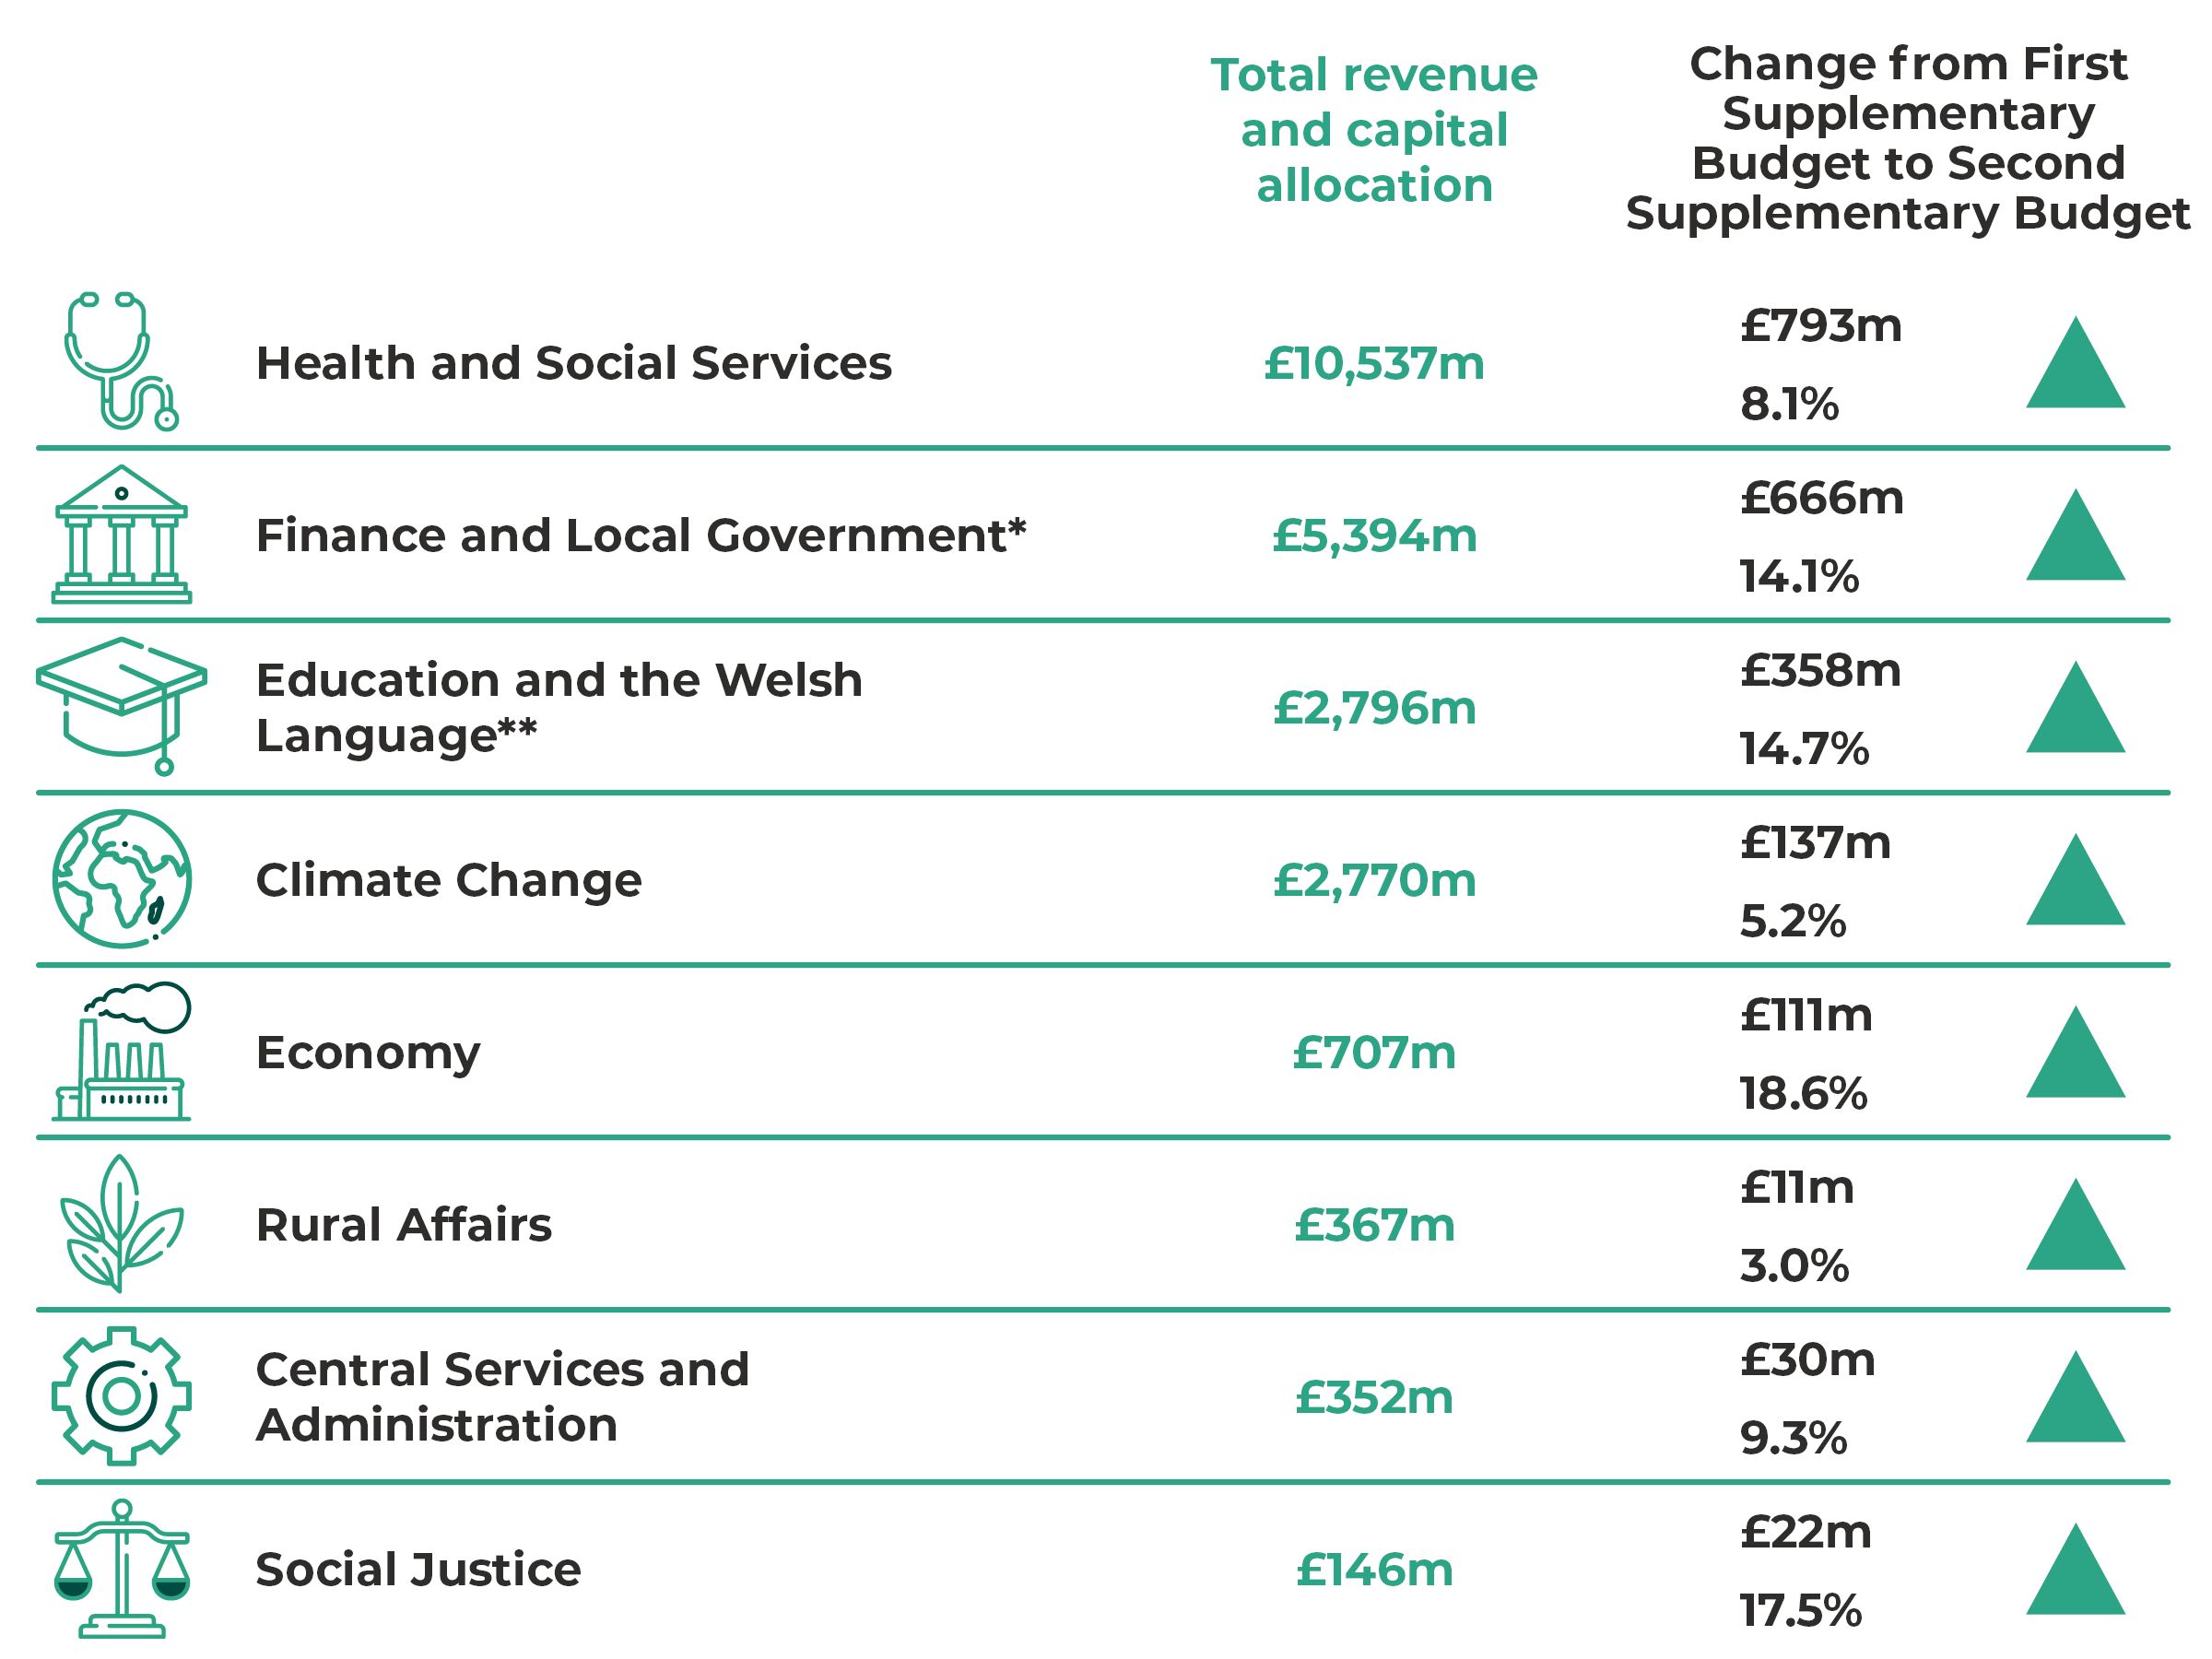 Table of total revenue and capital allocation by department. Health and Social Services: £10537m (up by £793m or 8.1%). Finance and Local Government: £5394m (up by £666m or 14.1%). Education and the Welsh Language: £2796m (up by £358m or 14.7%). Climate Change: £2770m (up by £137m or 5.2%). Economy: £707m (up by £111m or 18.6%). Rural Affairs: £367m (up by £11m or 3%). Central Services and Administration: £352m (up by £30m or 9.3%). Social Justice: £146m (up by £22m or 17.5%).